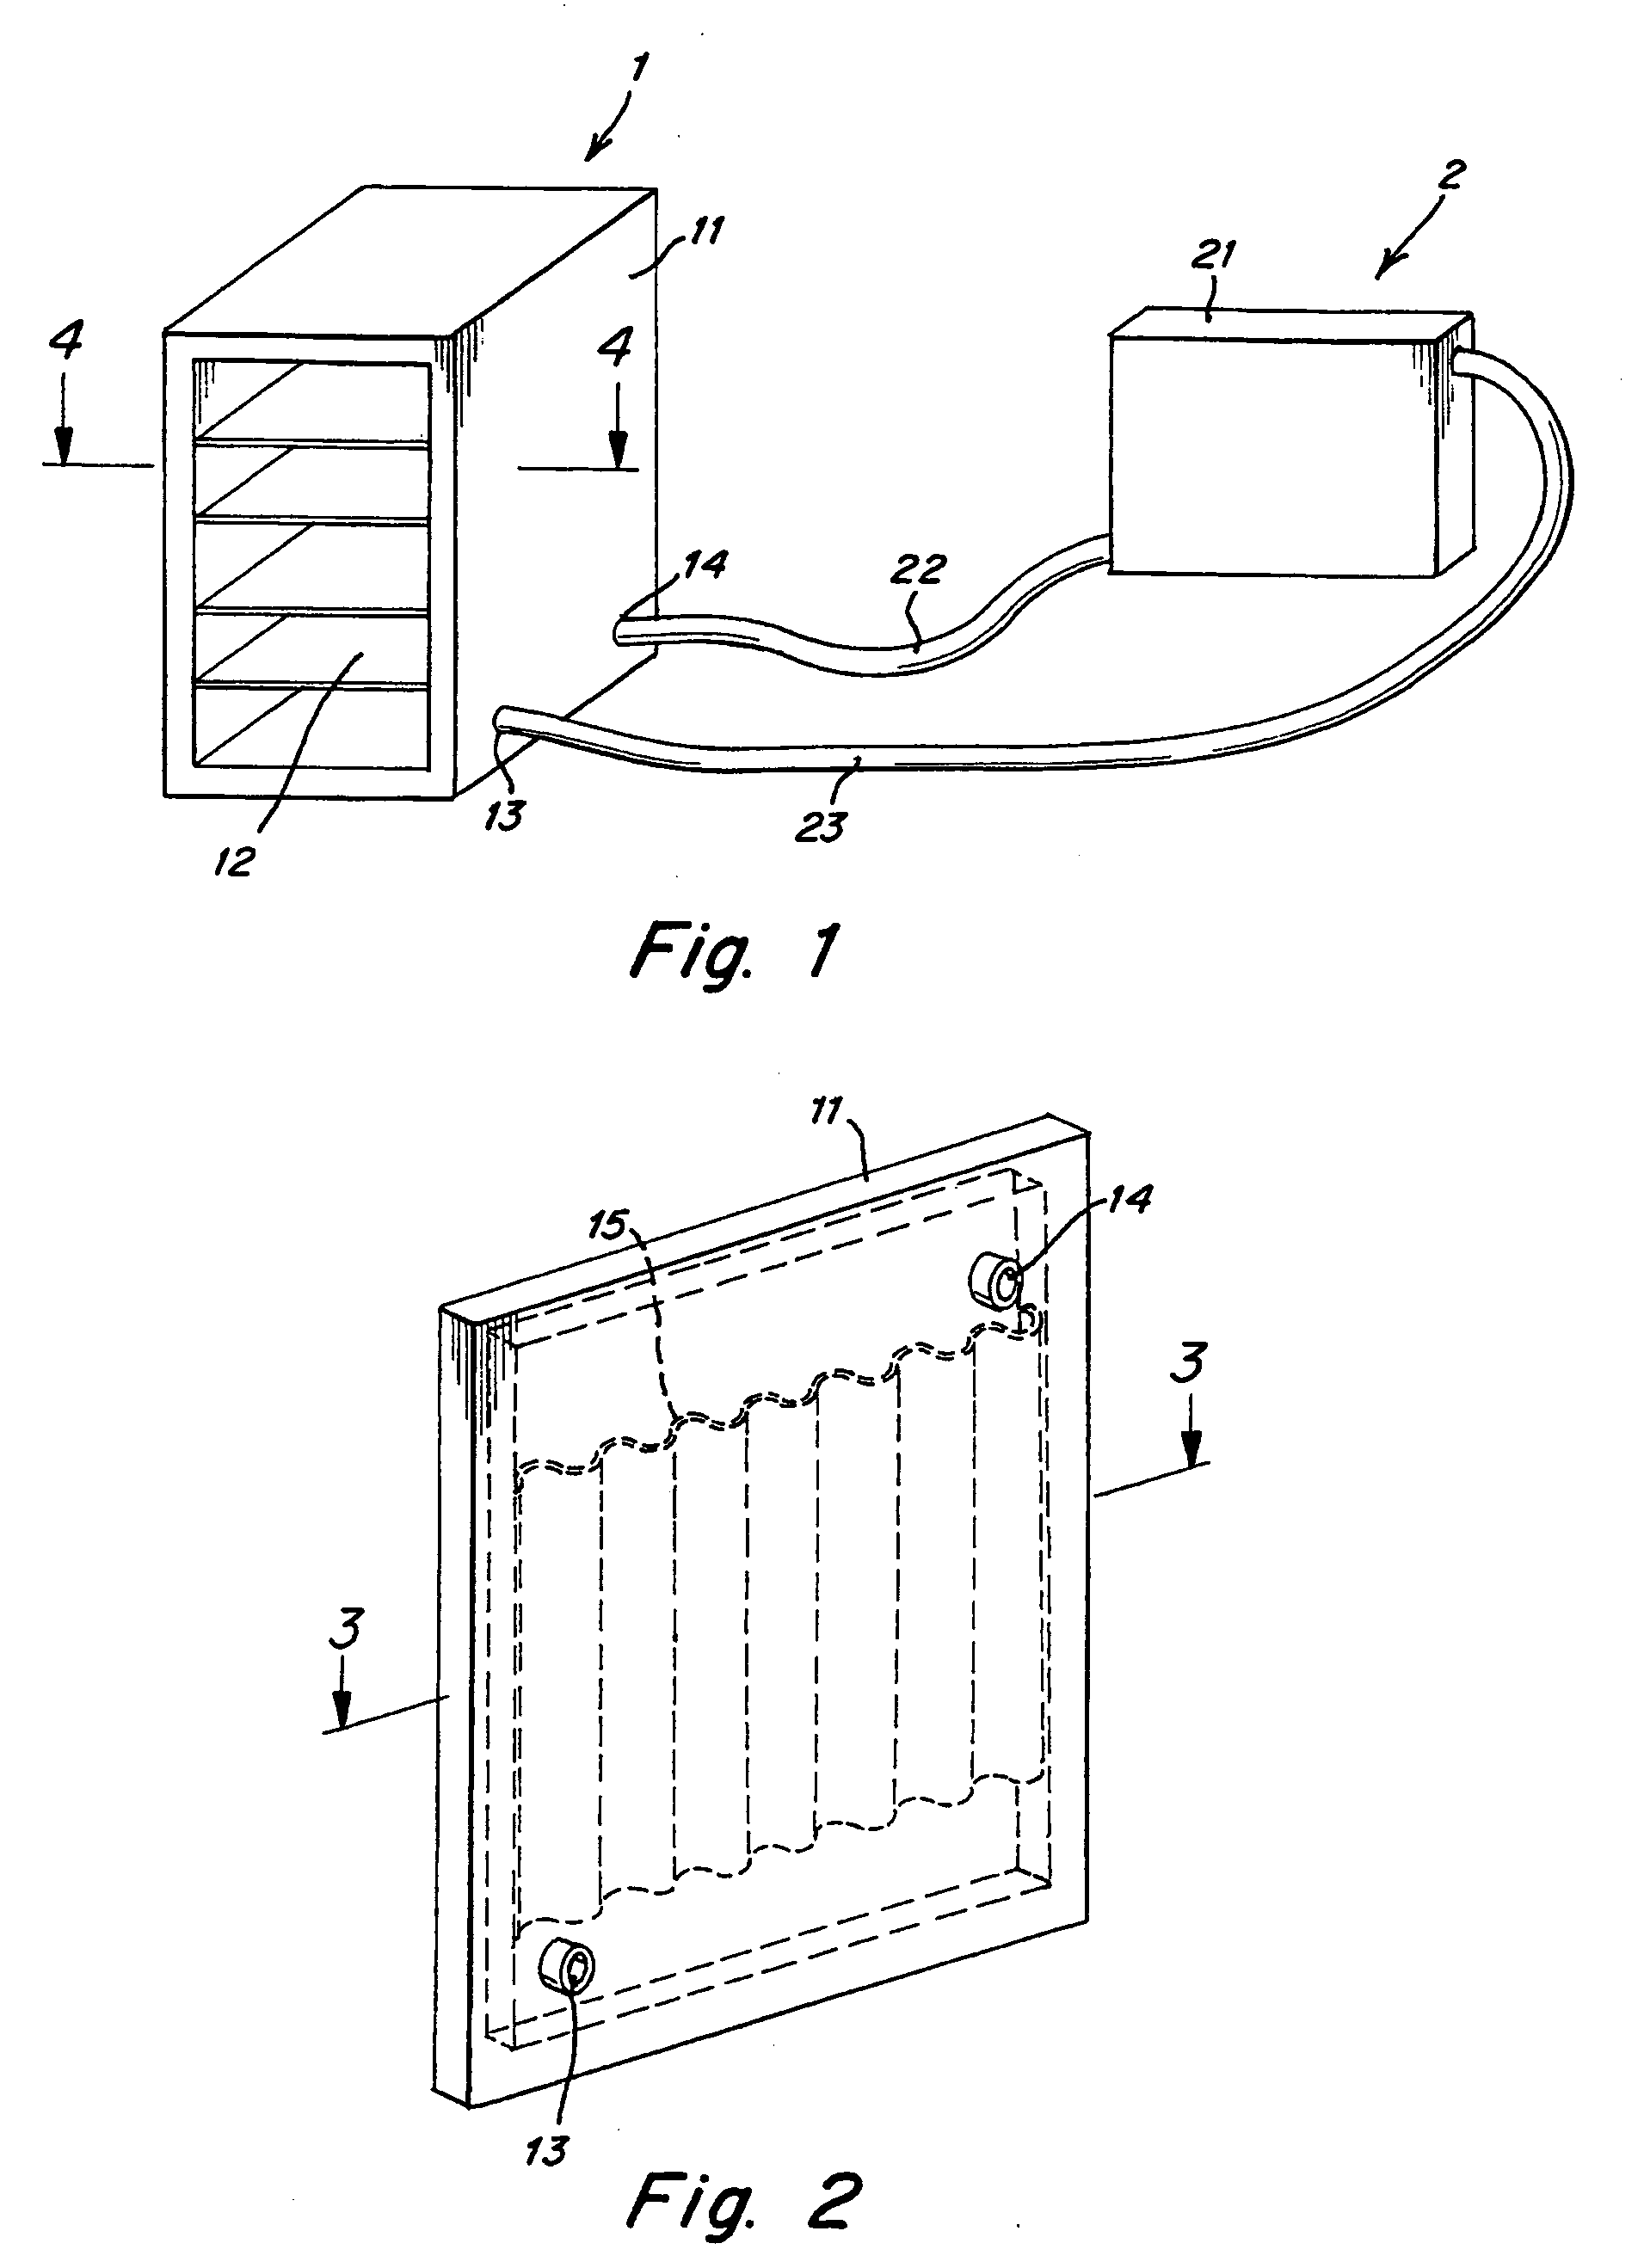 Environmental control method and apparatus for electronic device enclosures